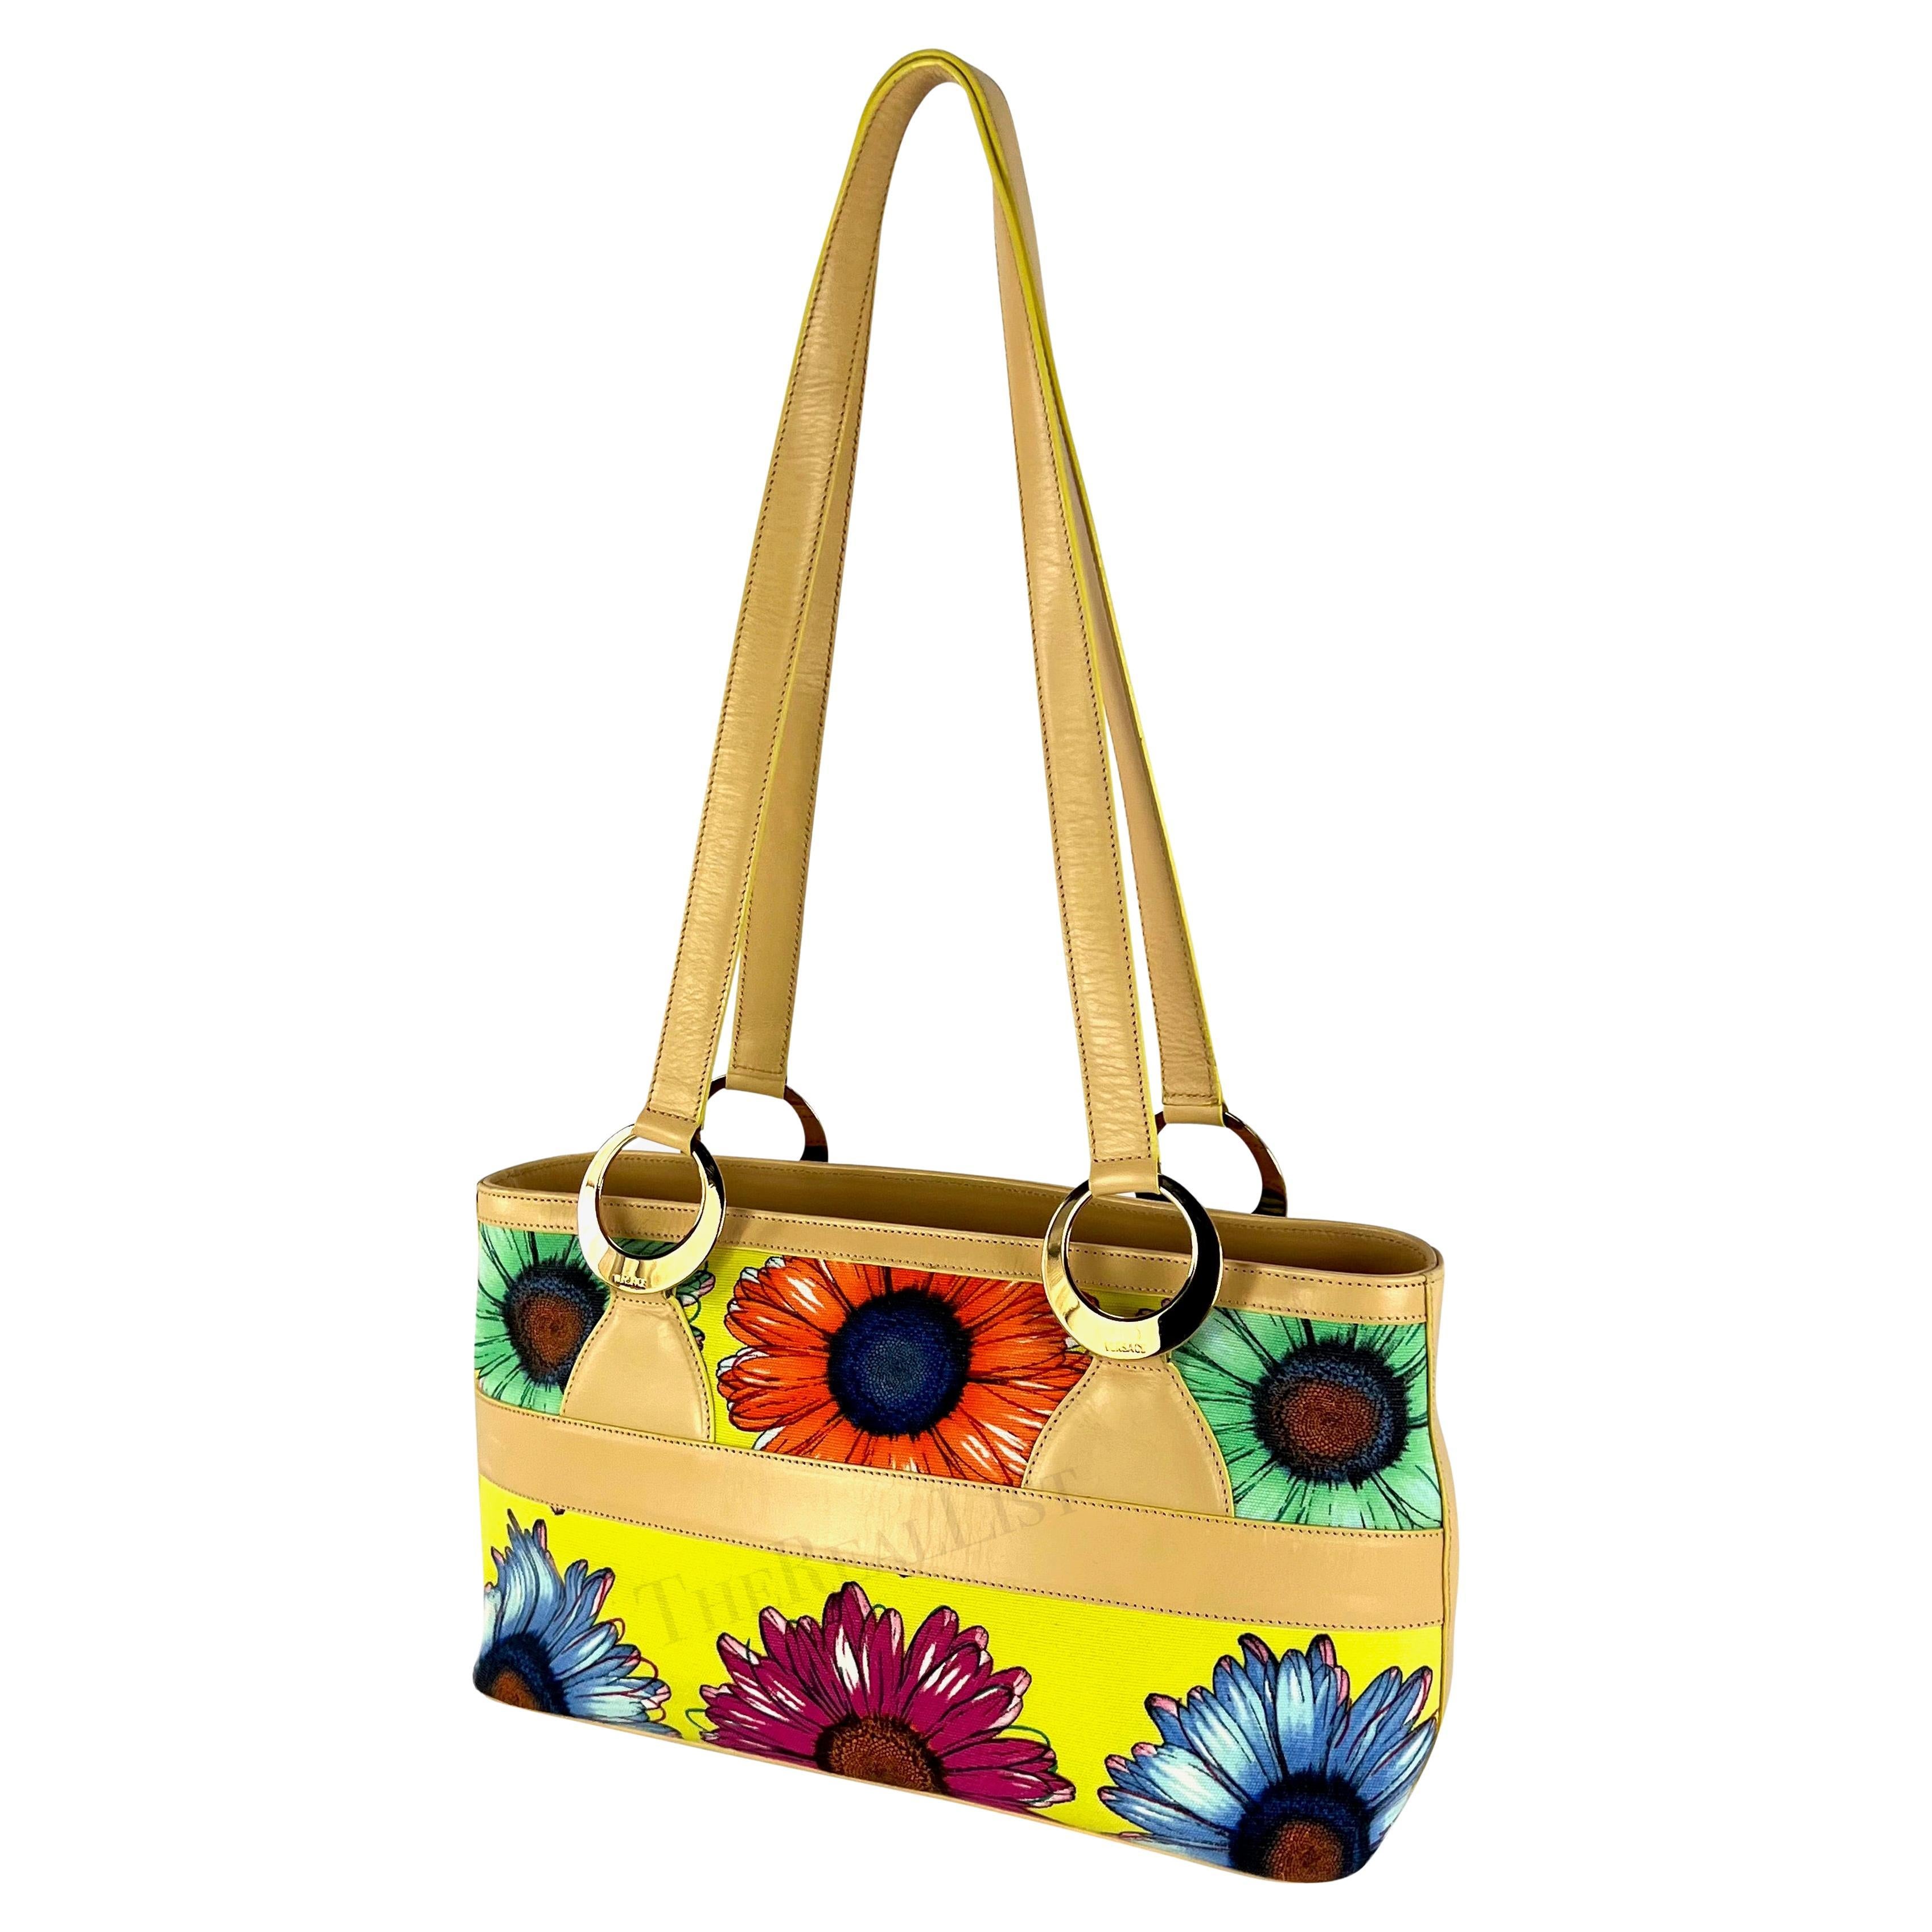 Presenting a fabulous yellow floral canvas Gianni Versace shoulder tote, designed by Donatella Versace. From the Spring/Summer 2002 collection, the floral print highlighted on this bag debuted on the season’s runway. This vibrant bag is made